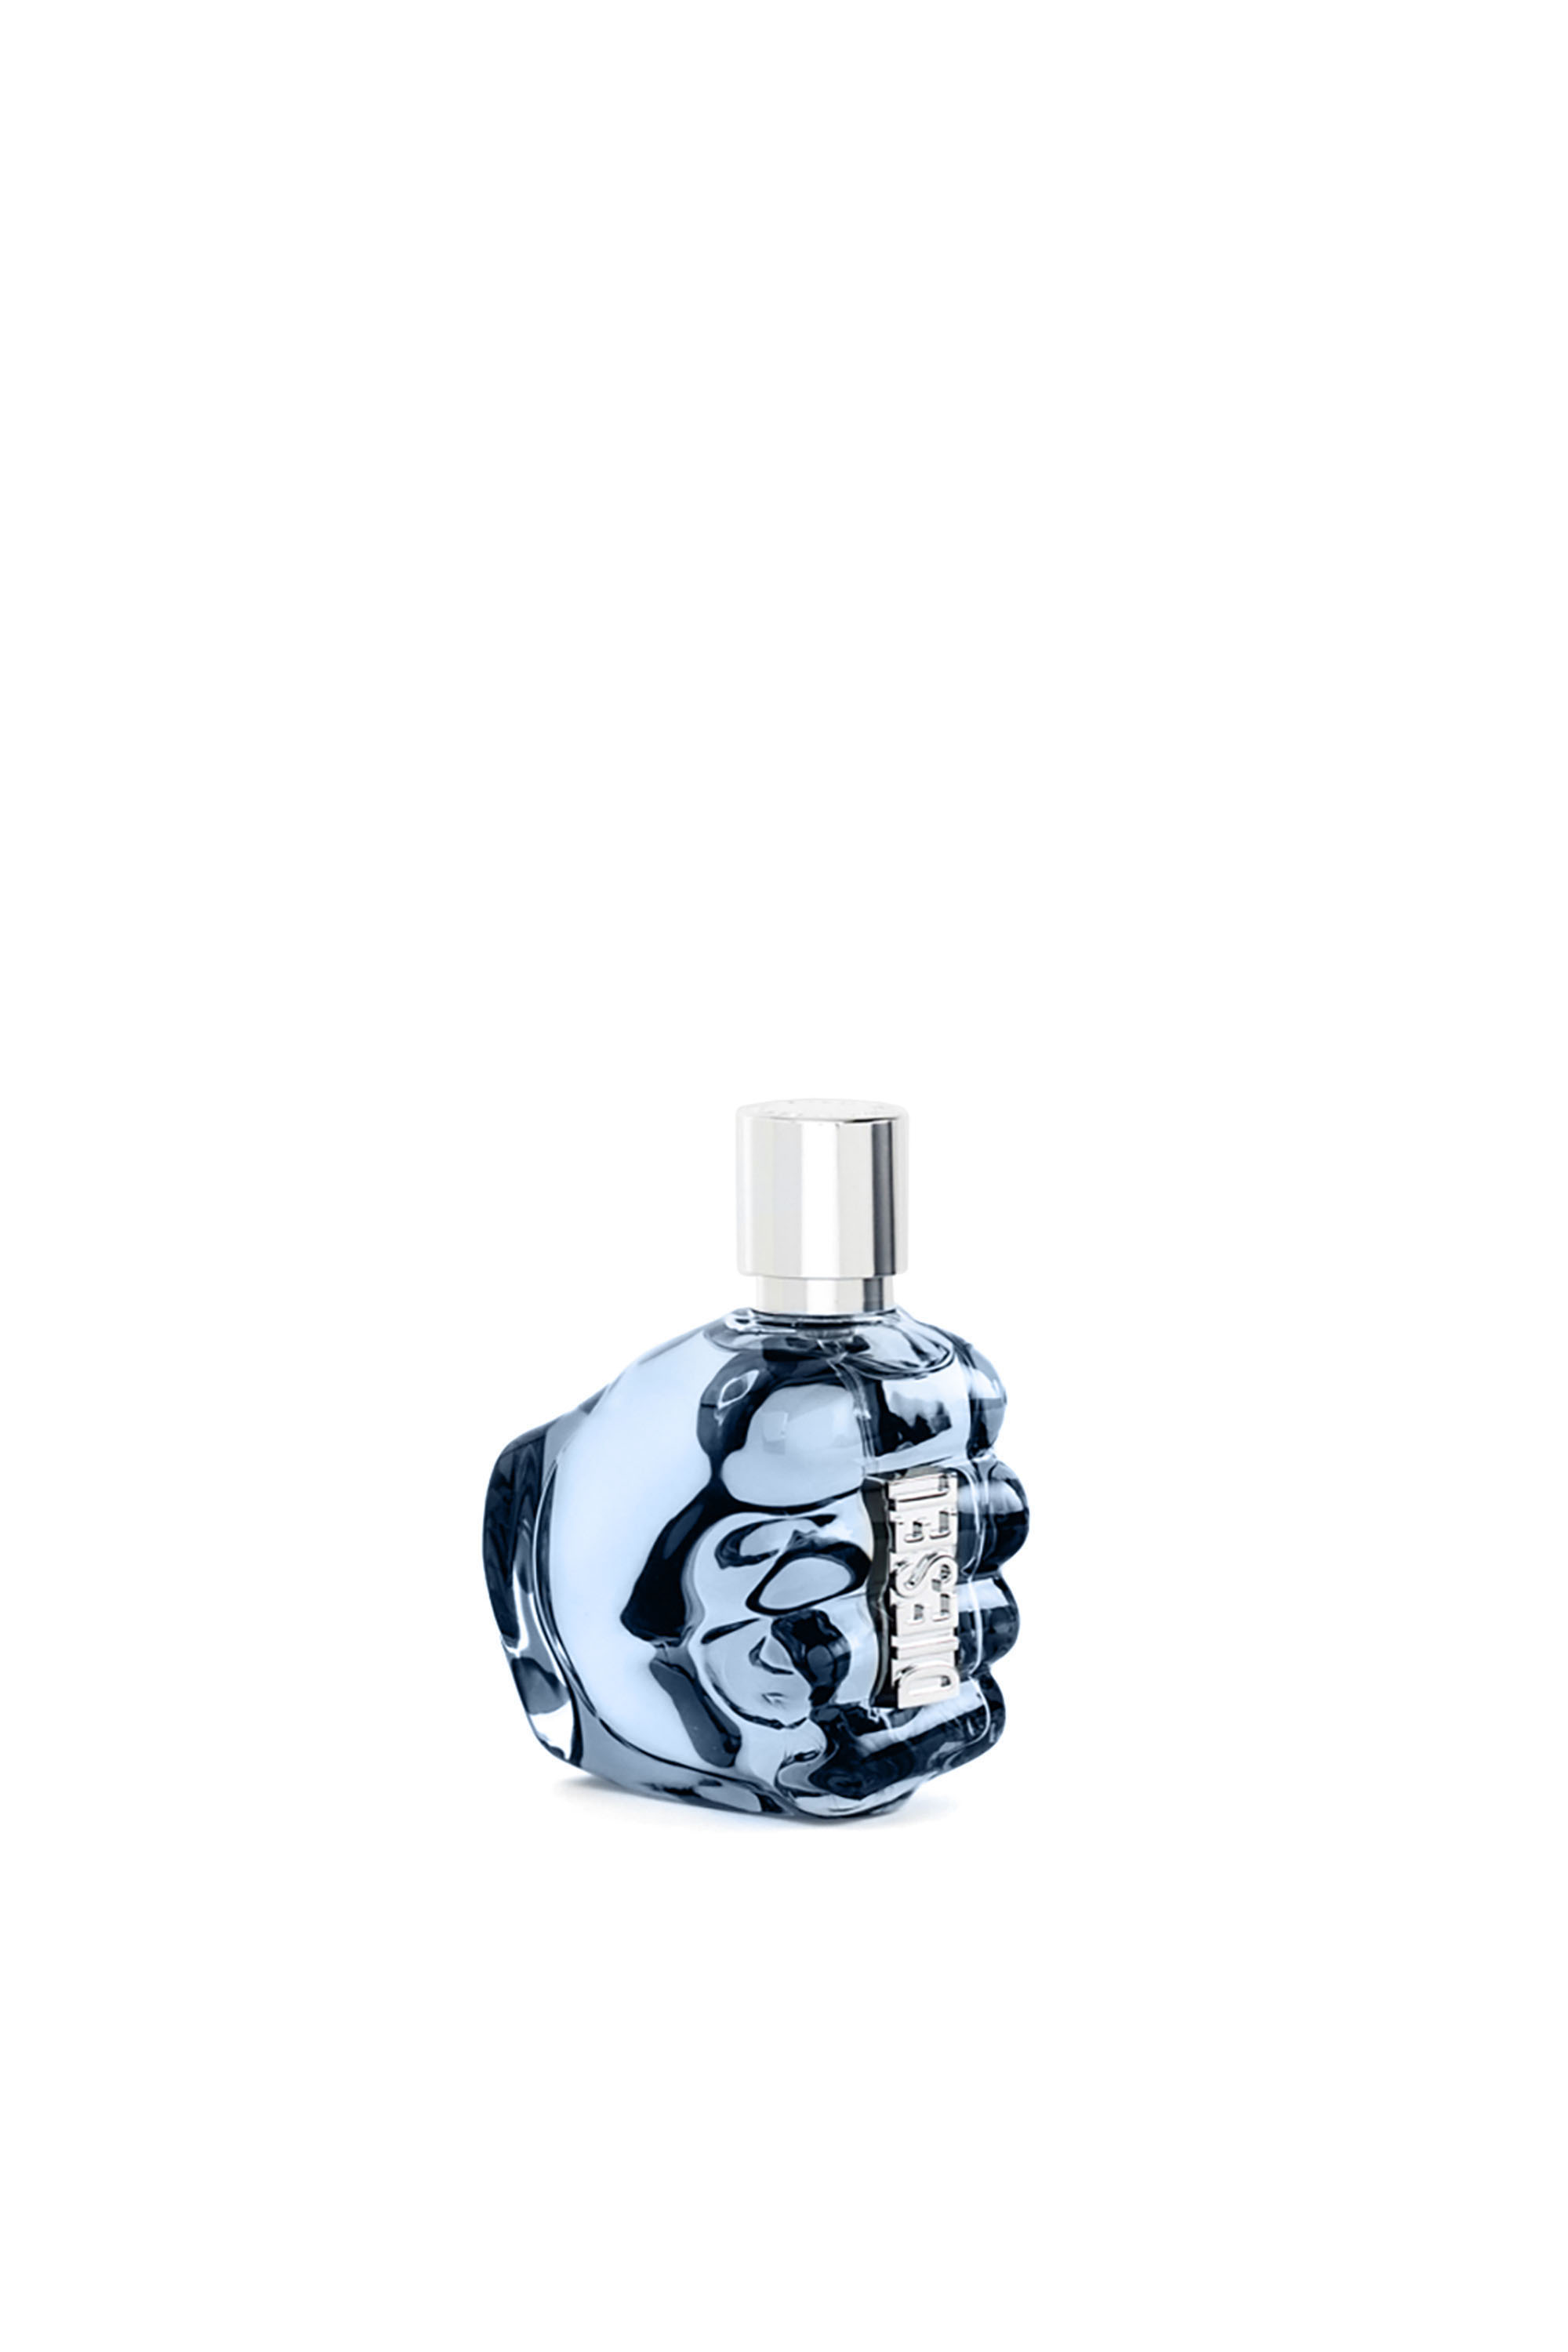 Diesel - ONLY THE BRAVE 50ML, Man Only the brave 50ml, eau de toilette in Blue - Image 1